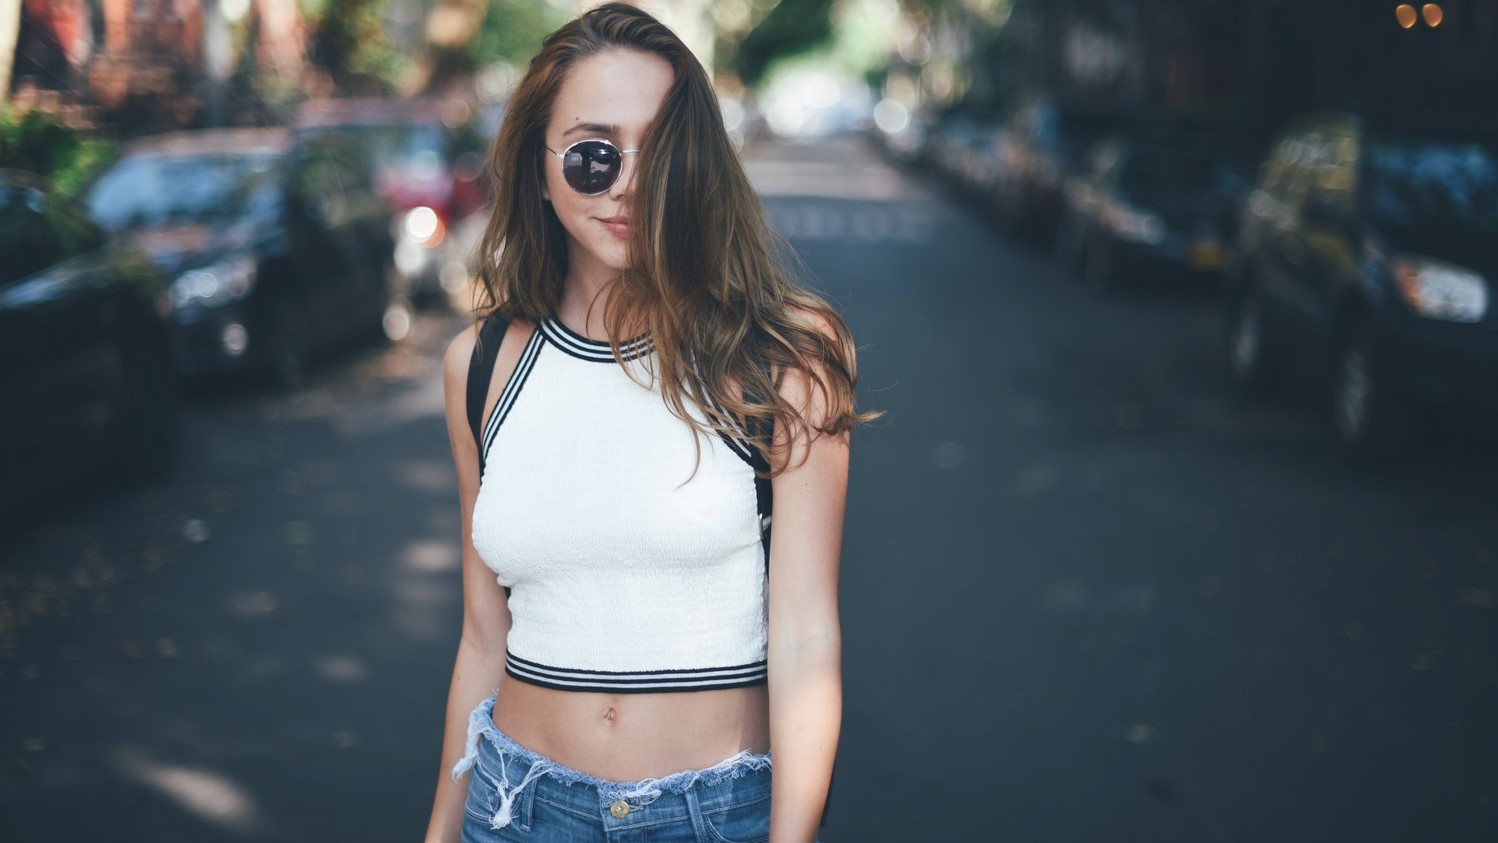 Hair Covering Eyes Sunglasses Women With Shades Crop Top Bare Midriff Navels Street Fashion Depth Of 1498x843